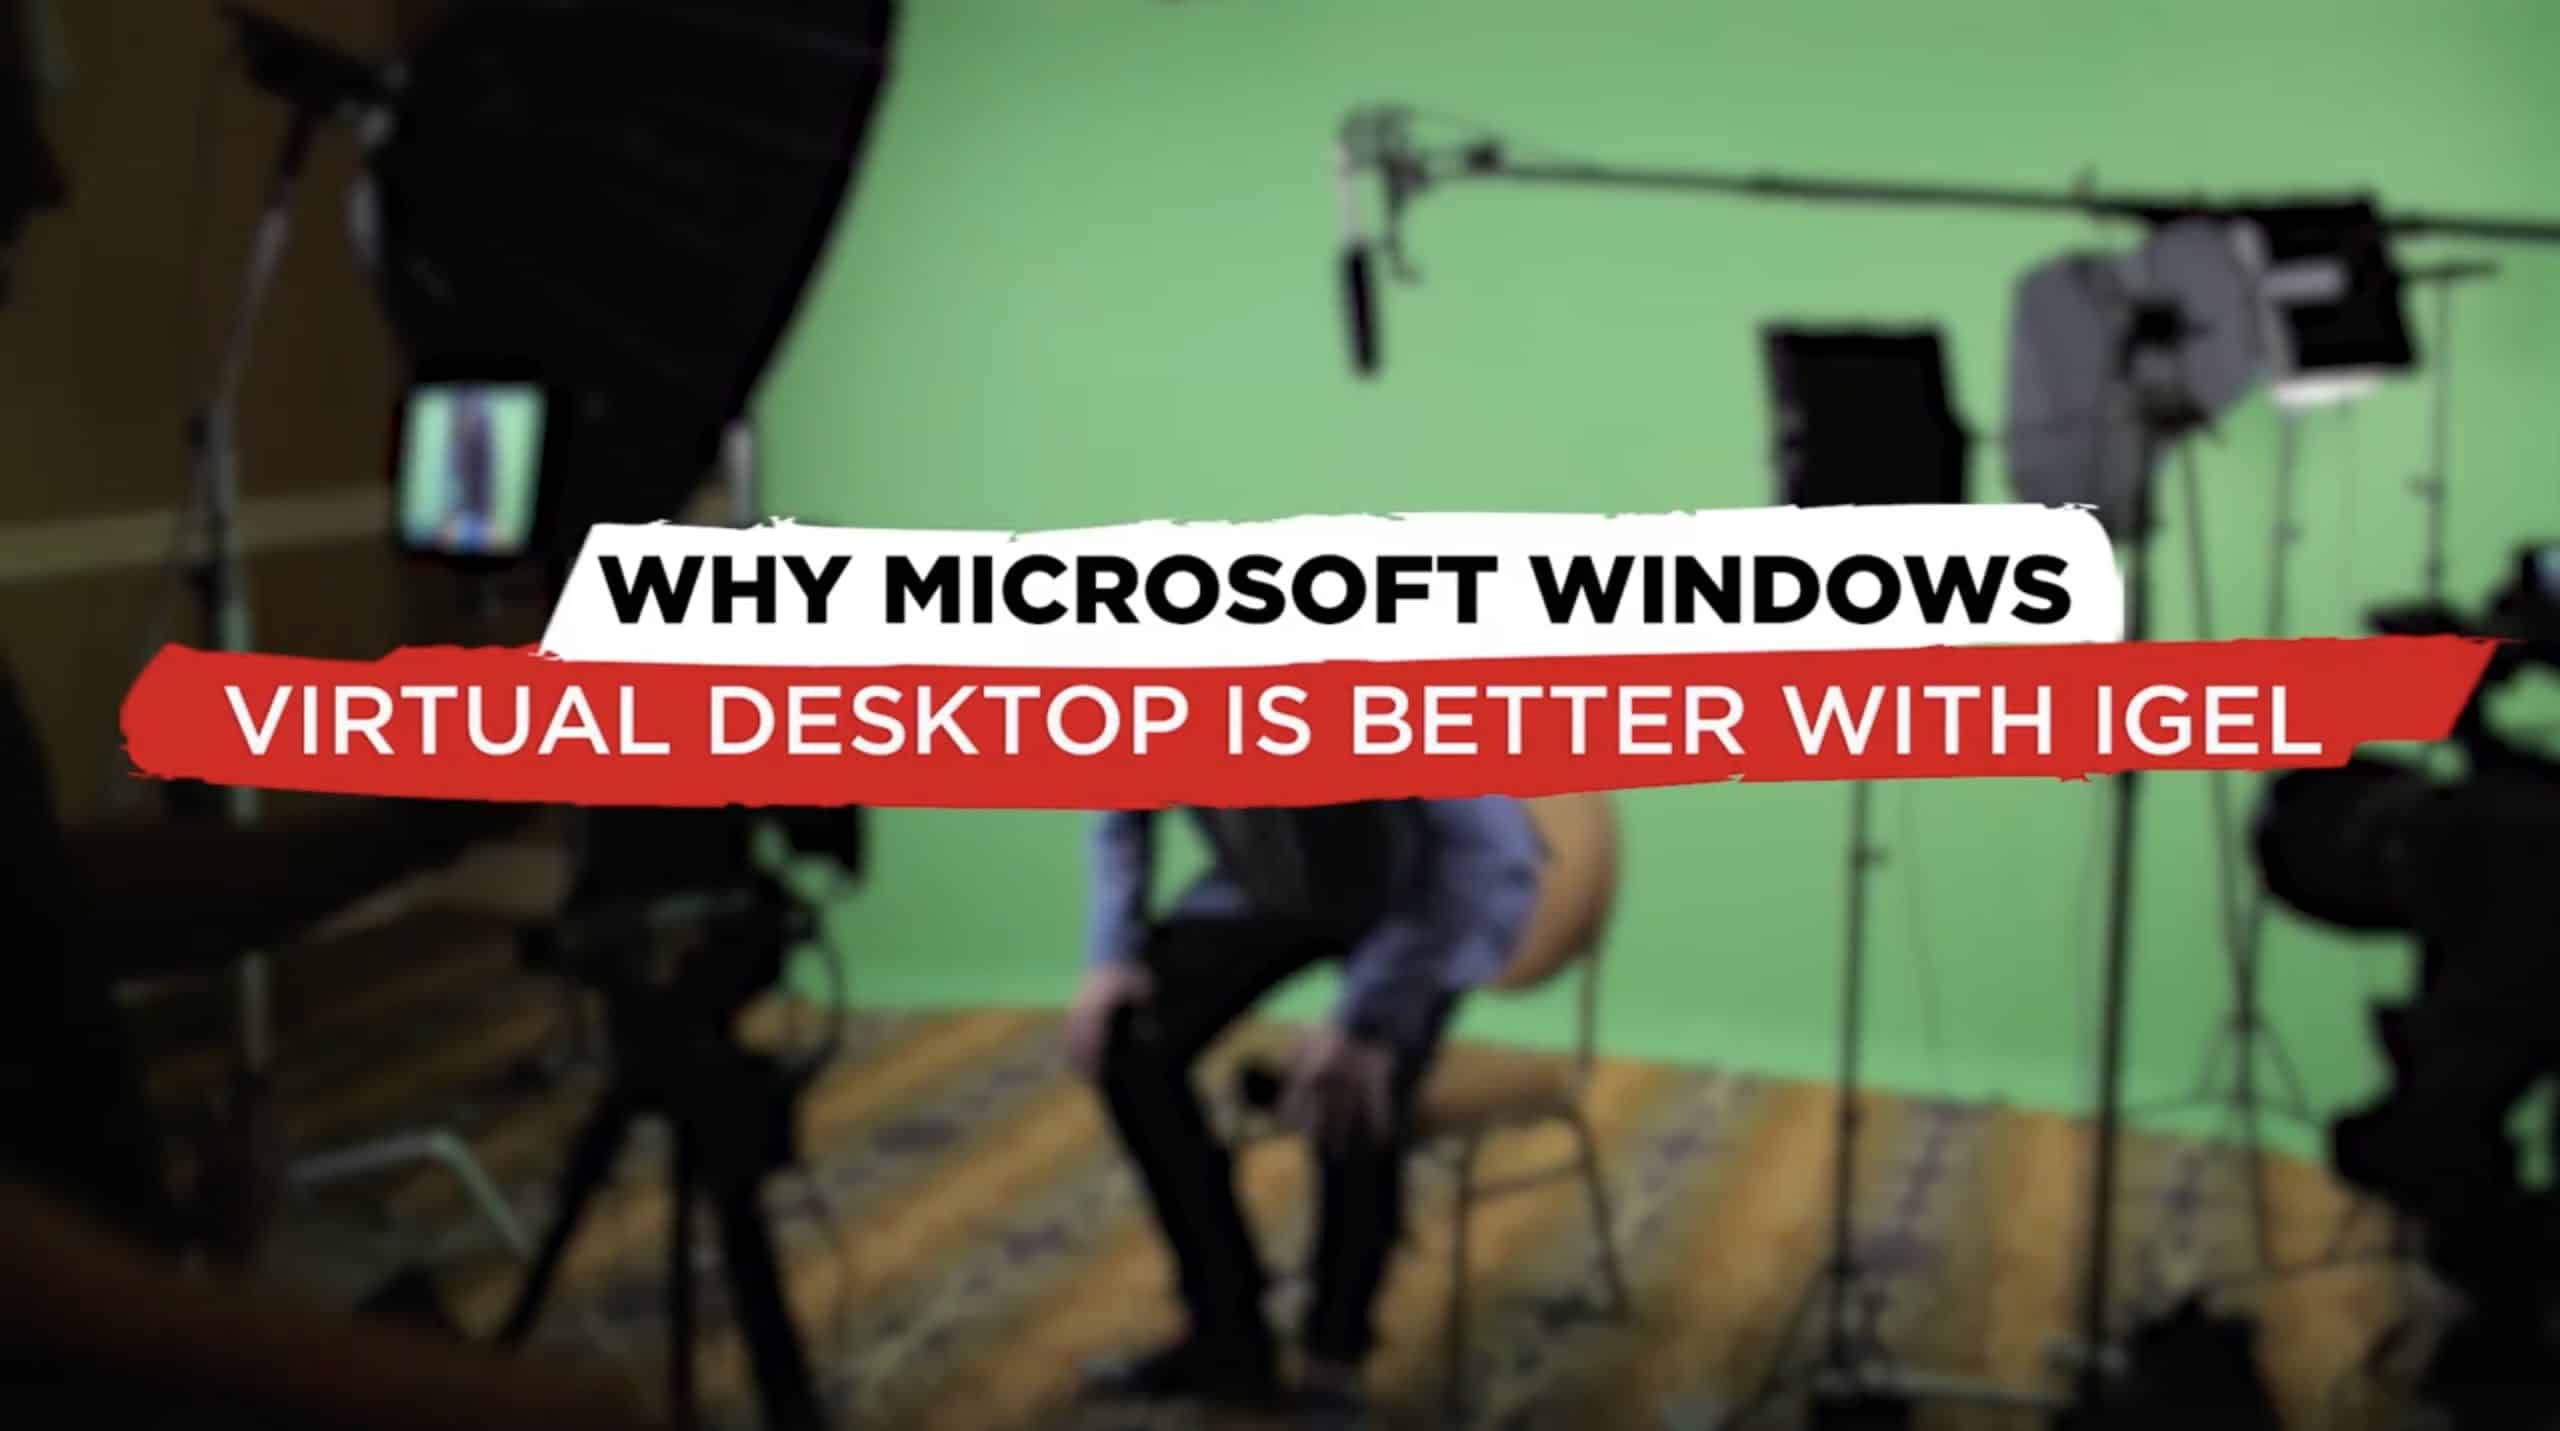 Why Microsoft Windows Virtual Desktop is better with IGEL